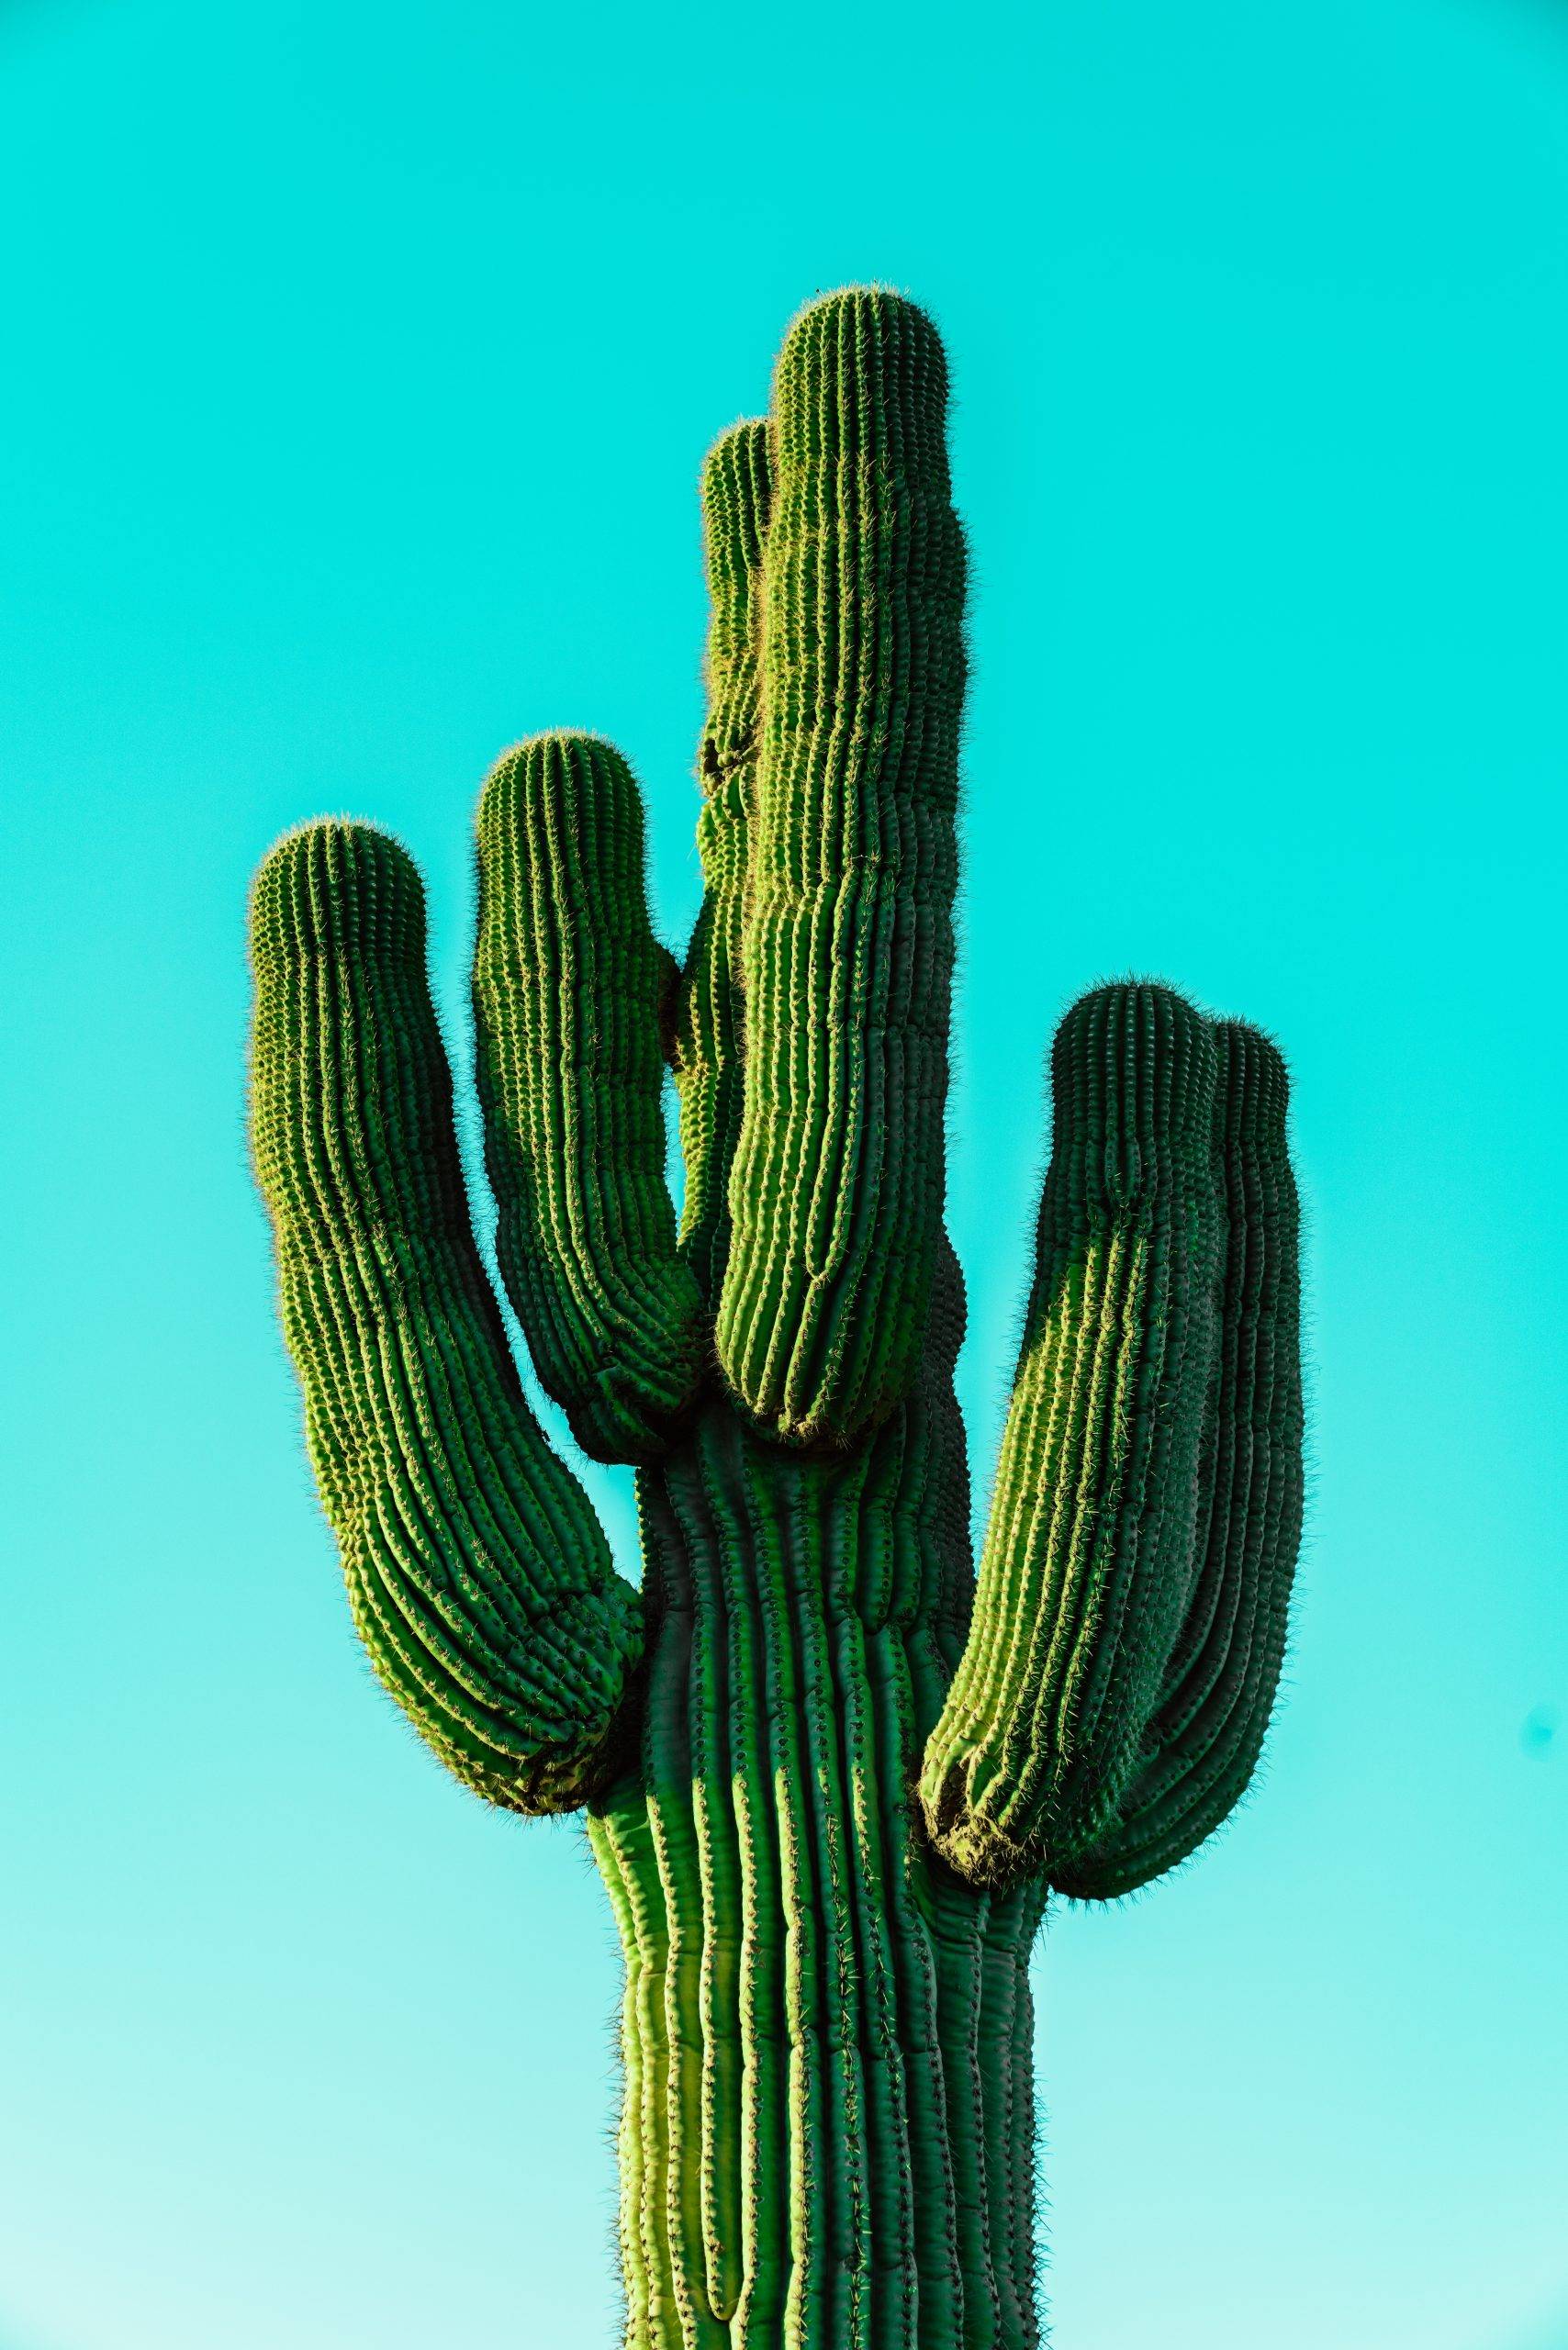 green-cactus-teal-background-tuscon-scaled